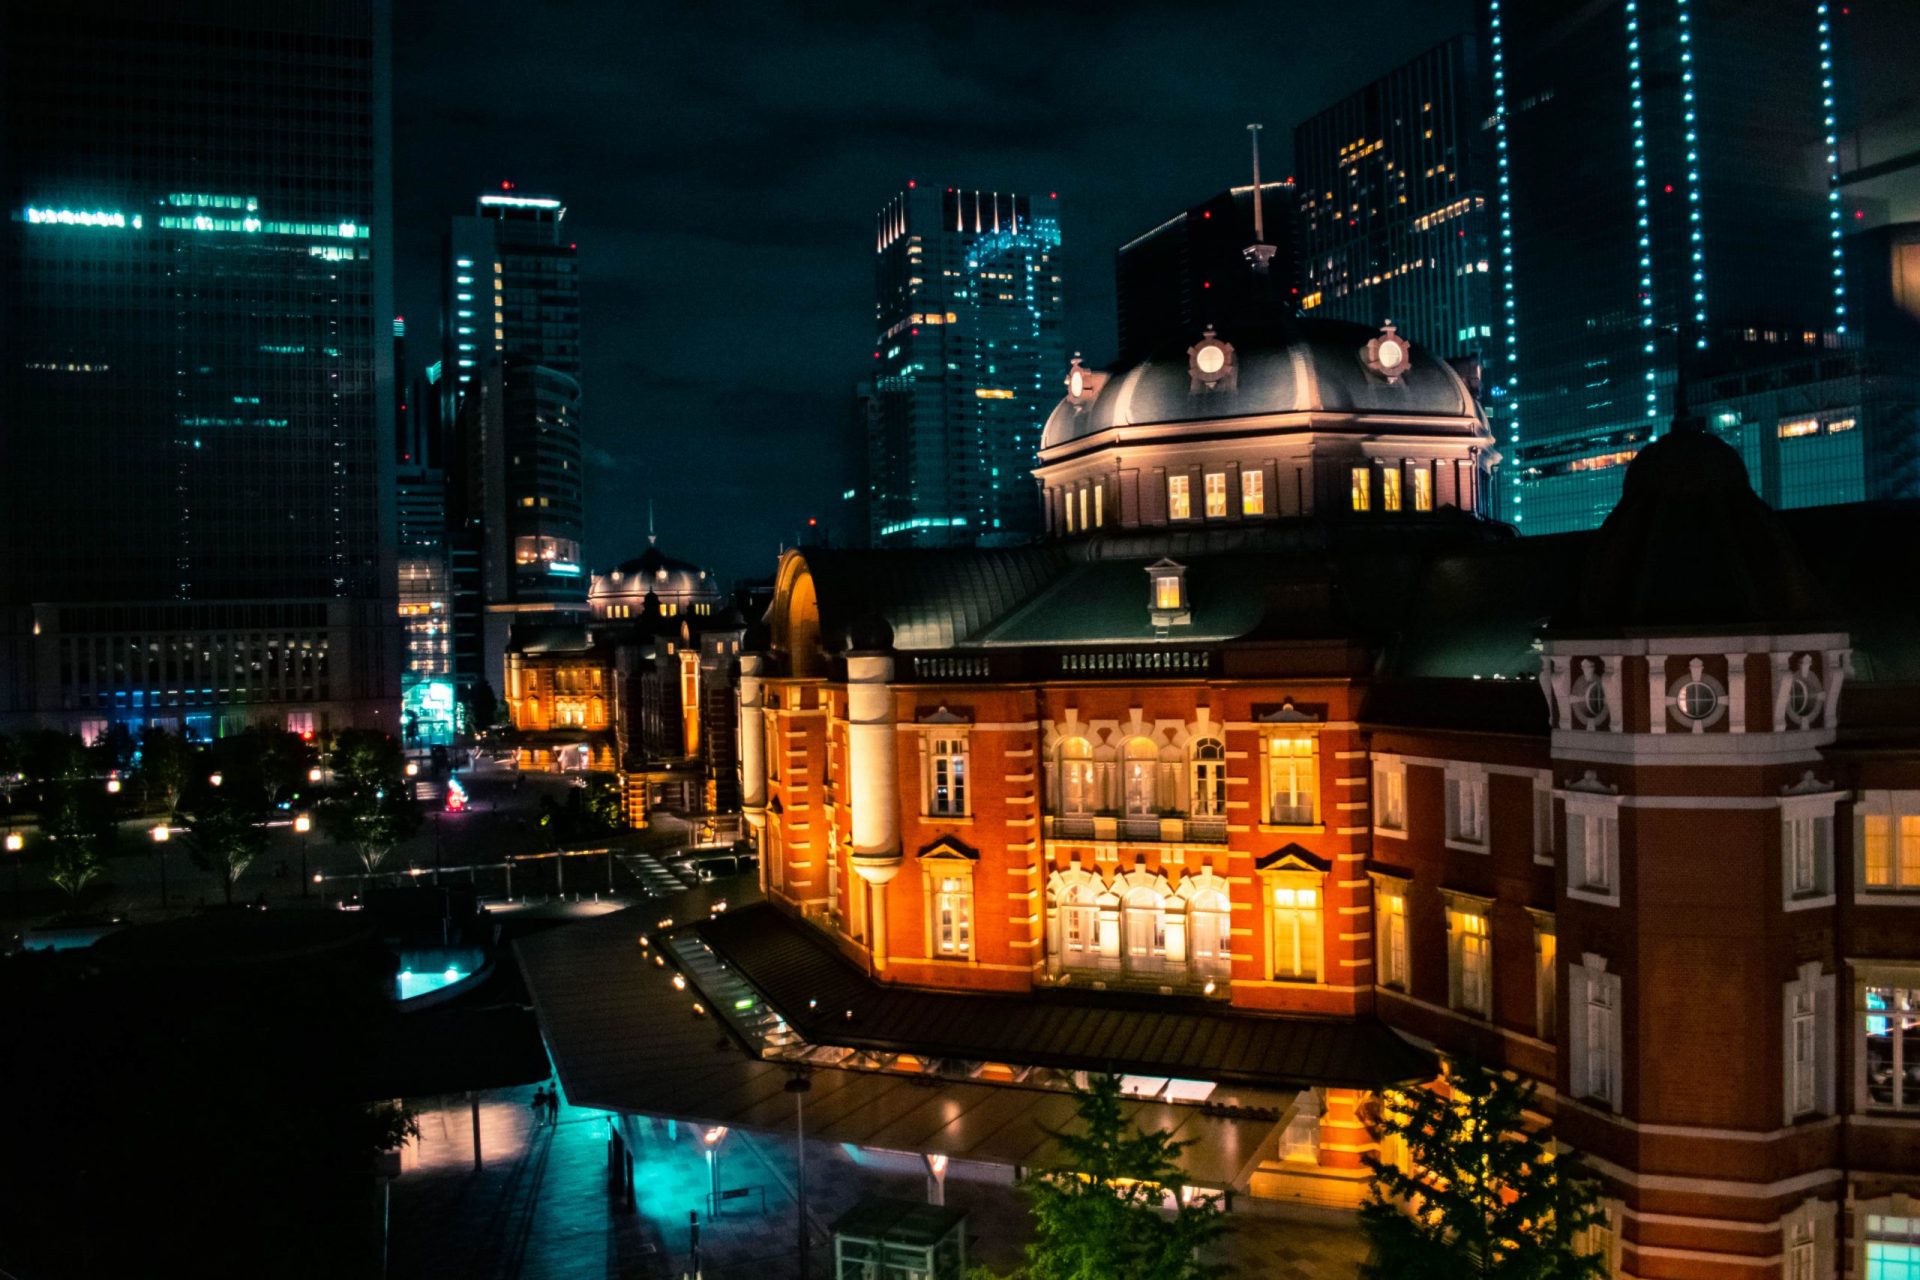 Tokyo station night vibes and lights photography with clouds